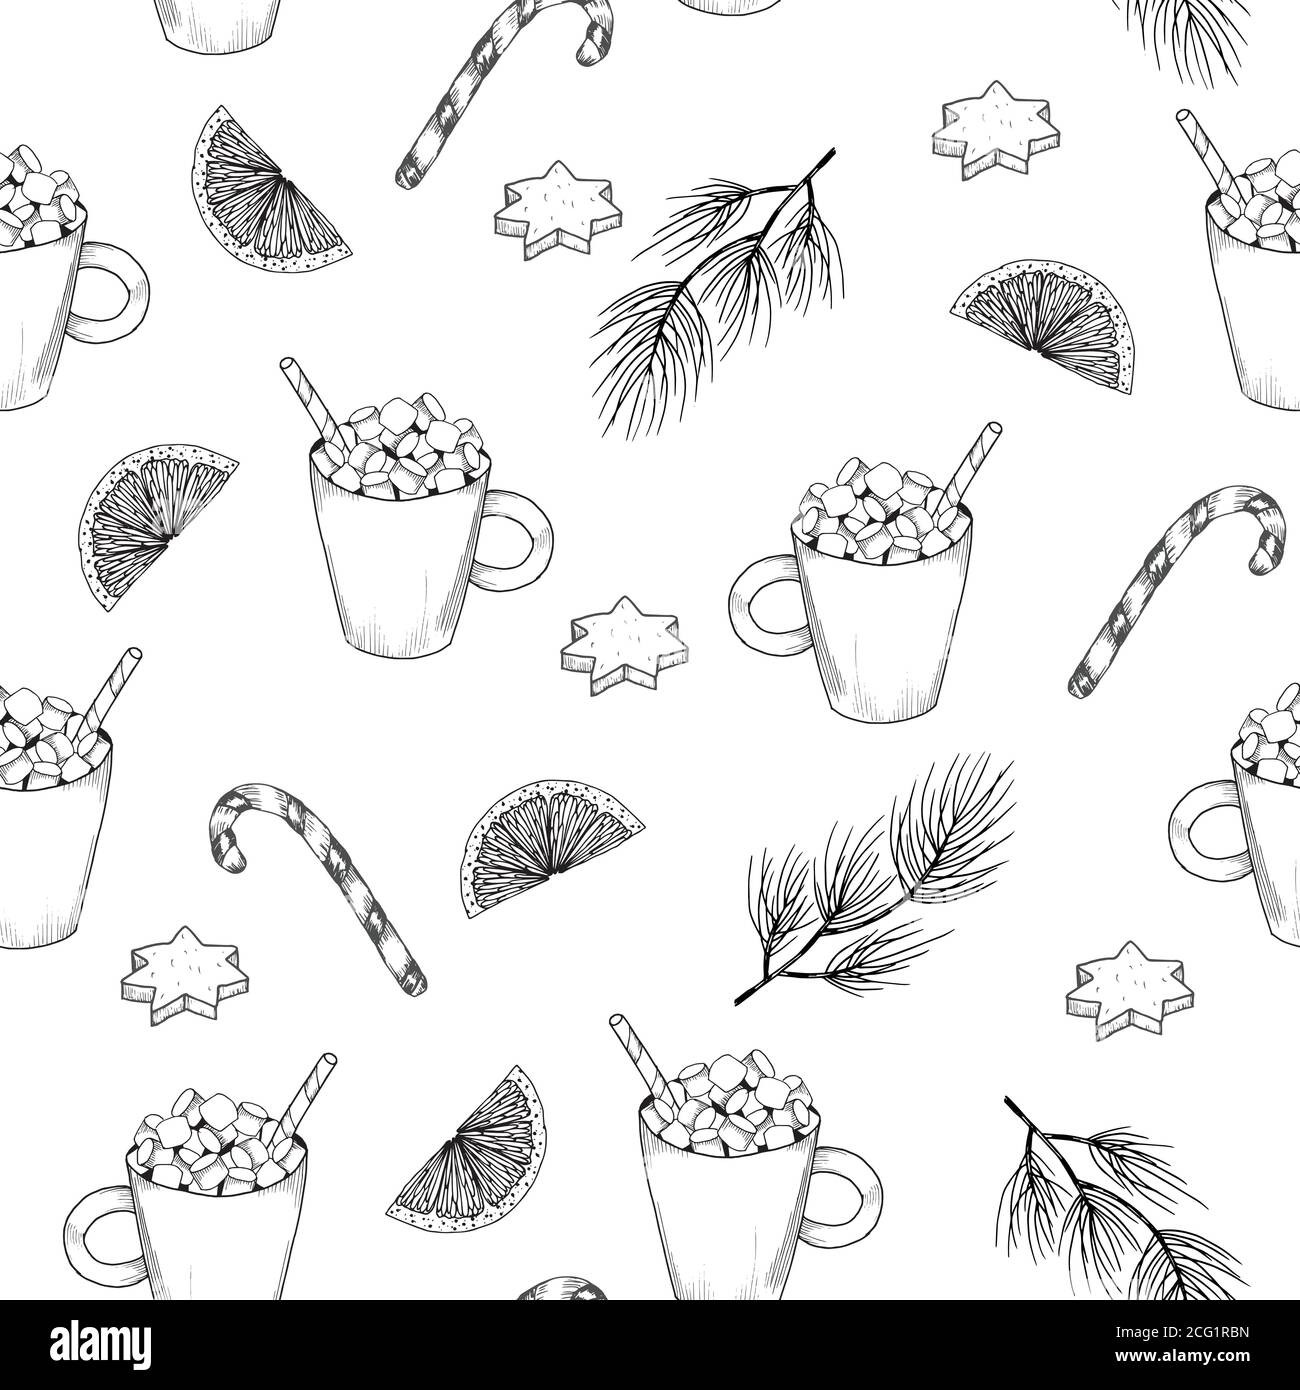 Hand drawn seamless pattern with desserts. Coffee, cocoa, biscuits, cupcake, biscuit cookies. Stock Vector